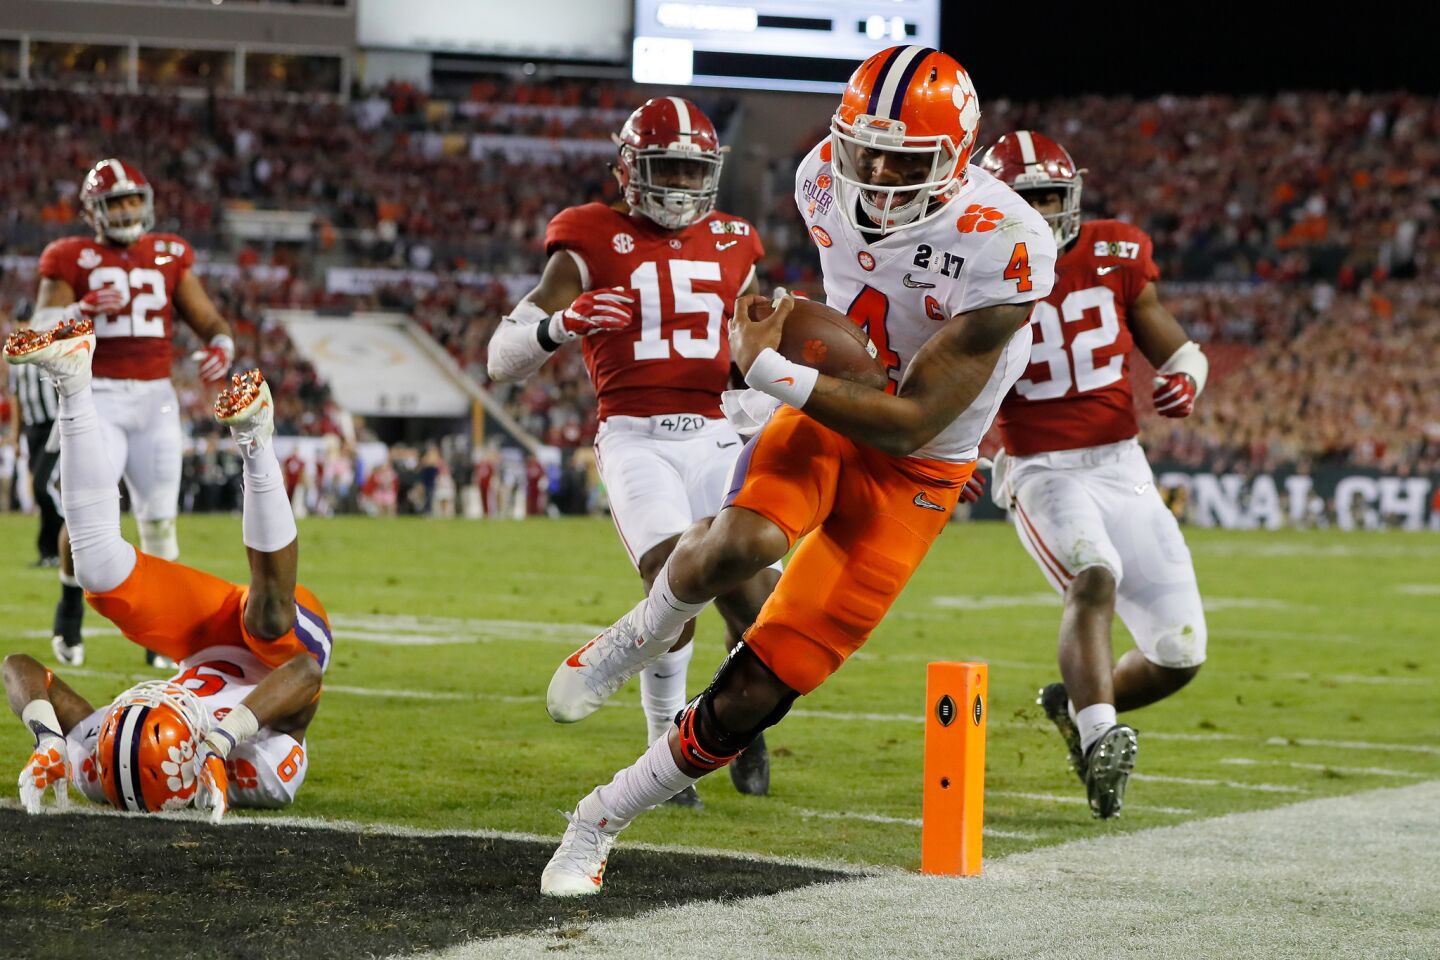 Clemson quarterback Deshaun Watson gets into the end zone on an eight-yard run during the College Football Playoff national championship game in Tampa, Fla., on Jan. 9